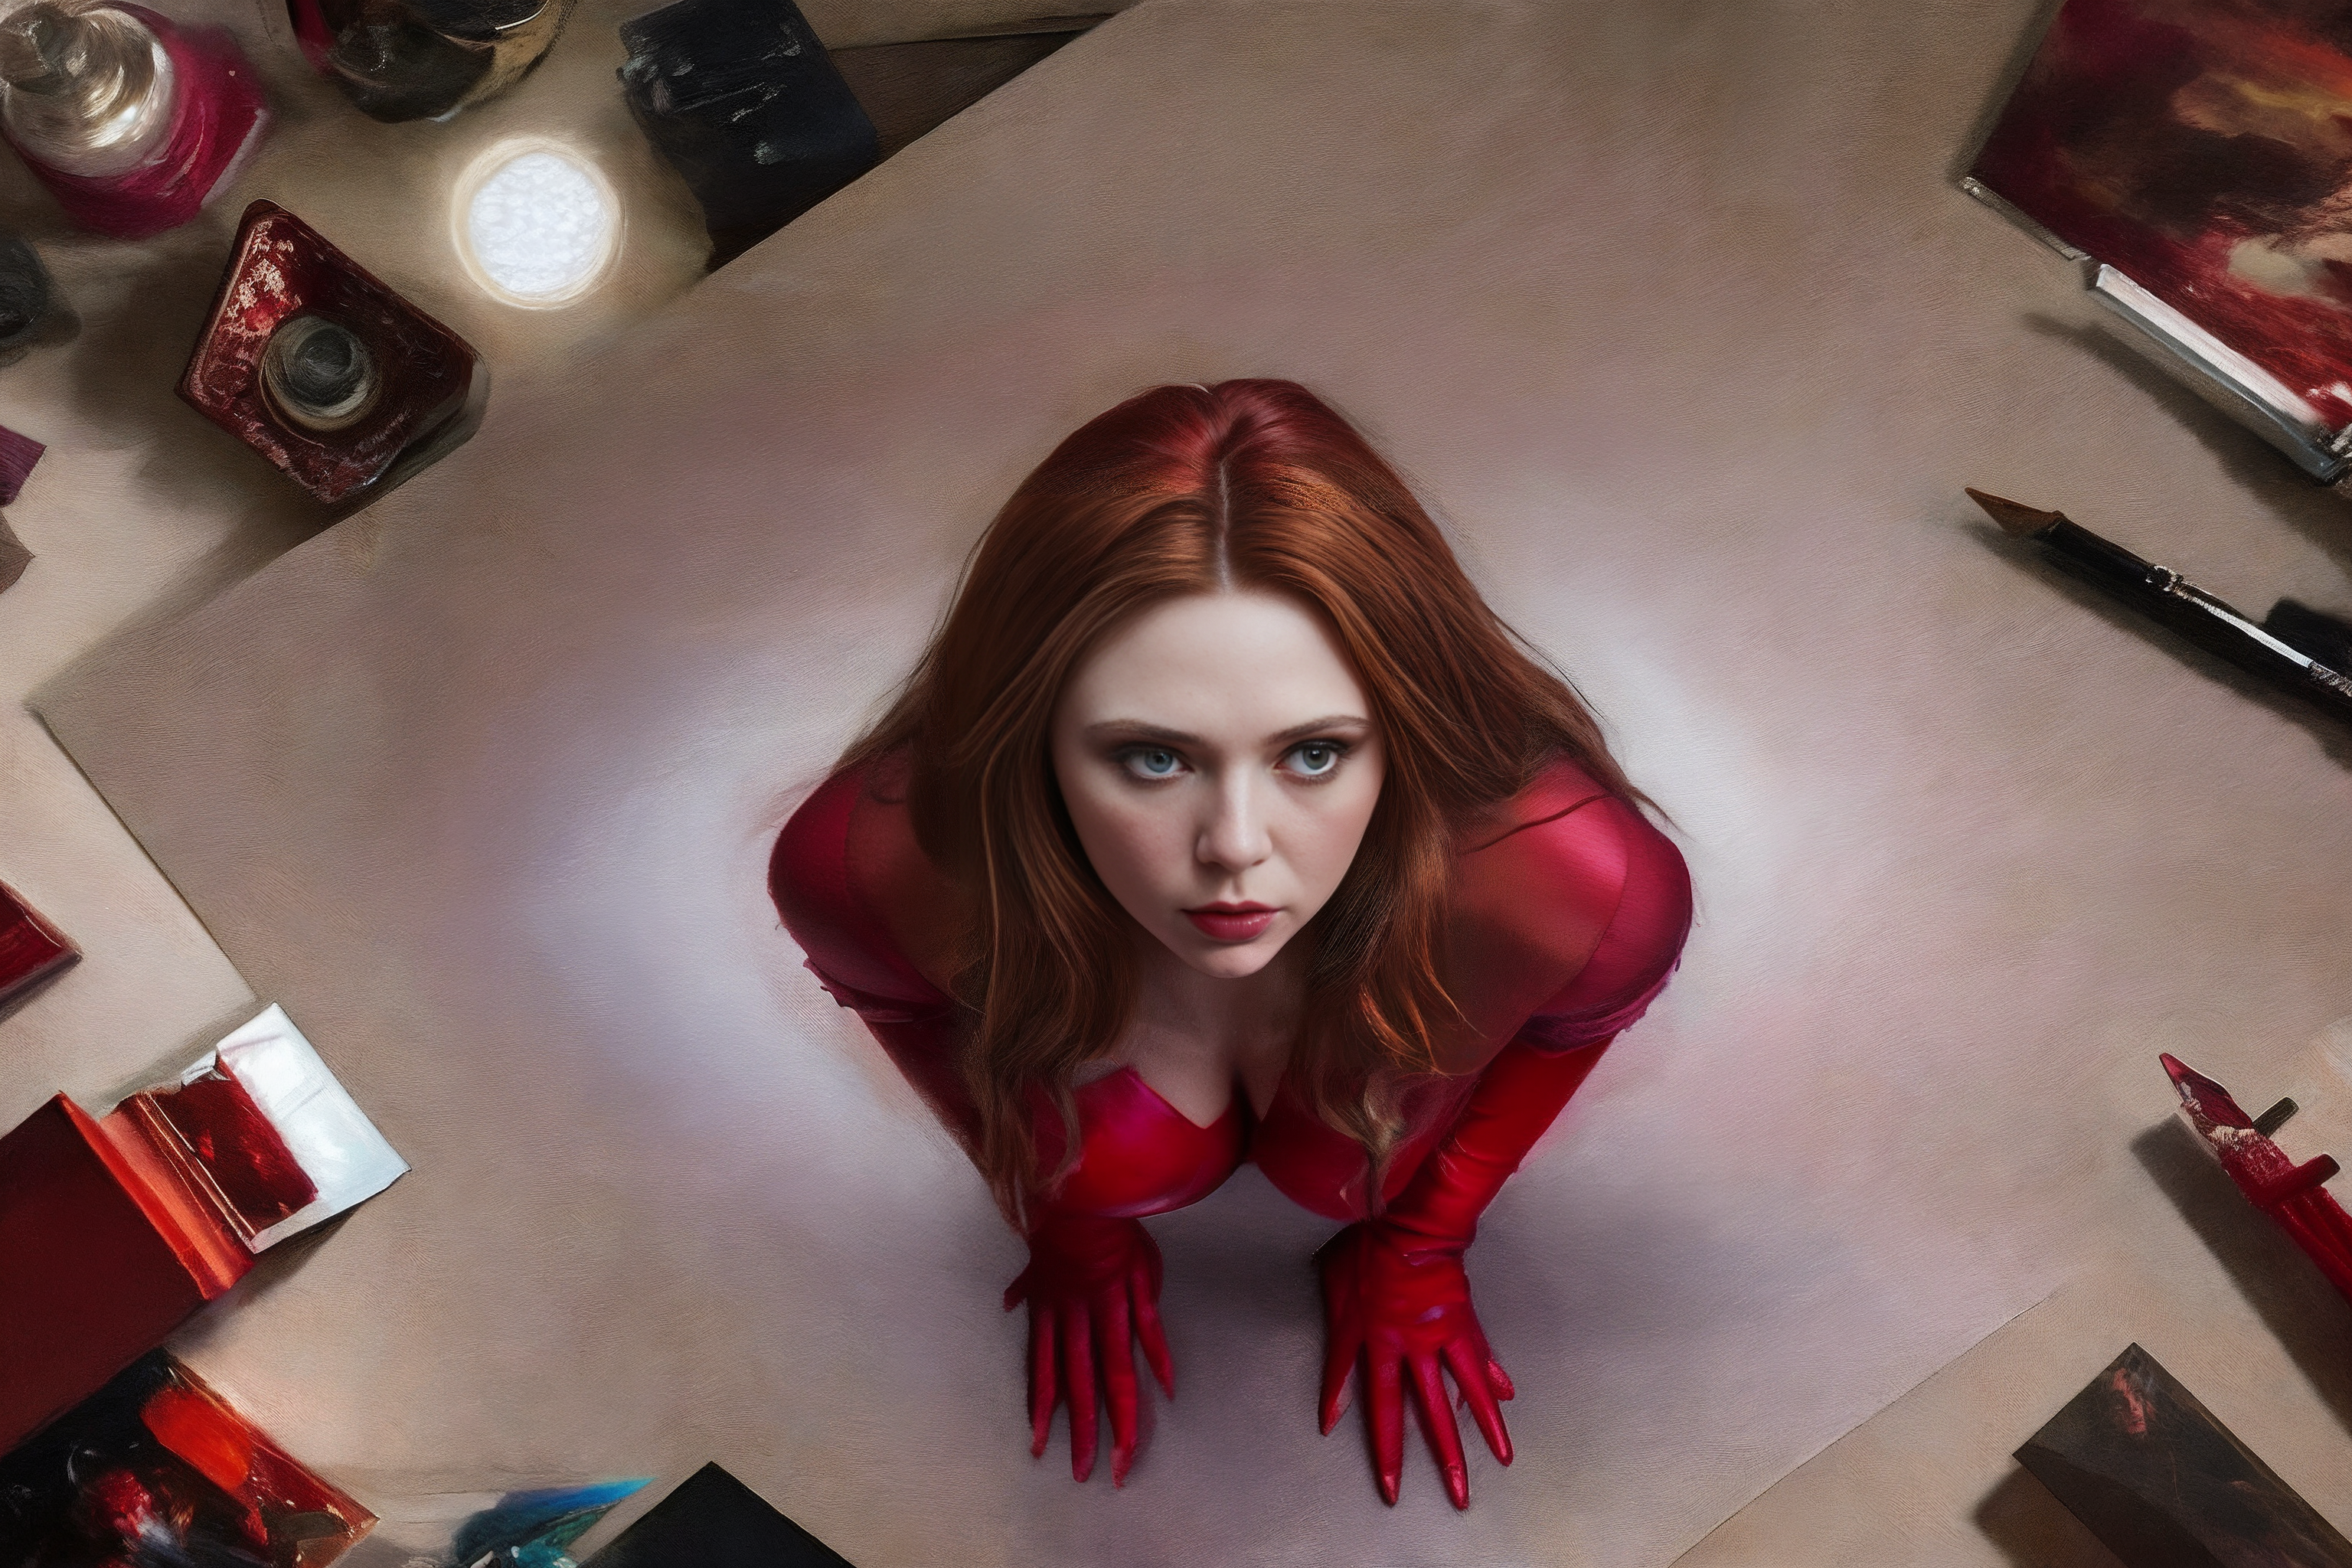 General 3072x2048 cleavage cutout looking up red clothing redhead tight clothing cosplay AI art Marvel Comics Scarlet Witch long hair red lipstick lipstick closed mouth blue eyes top view women